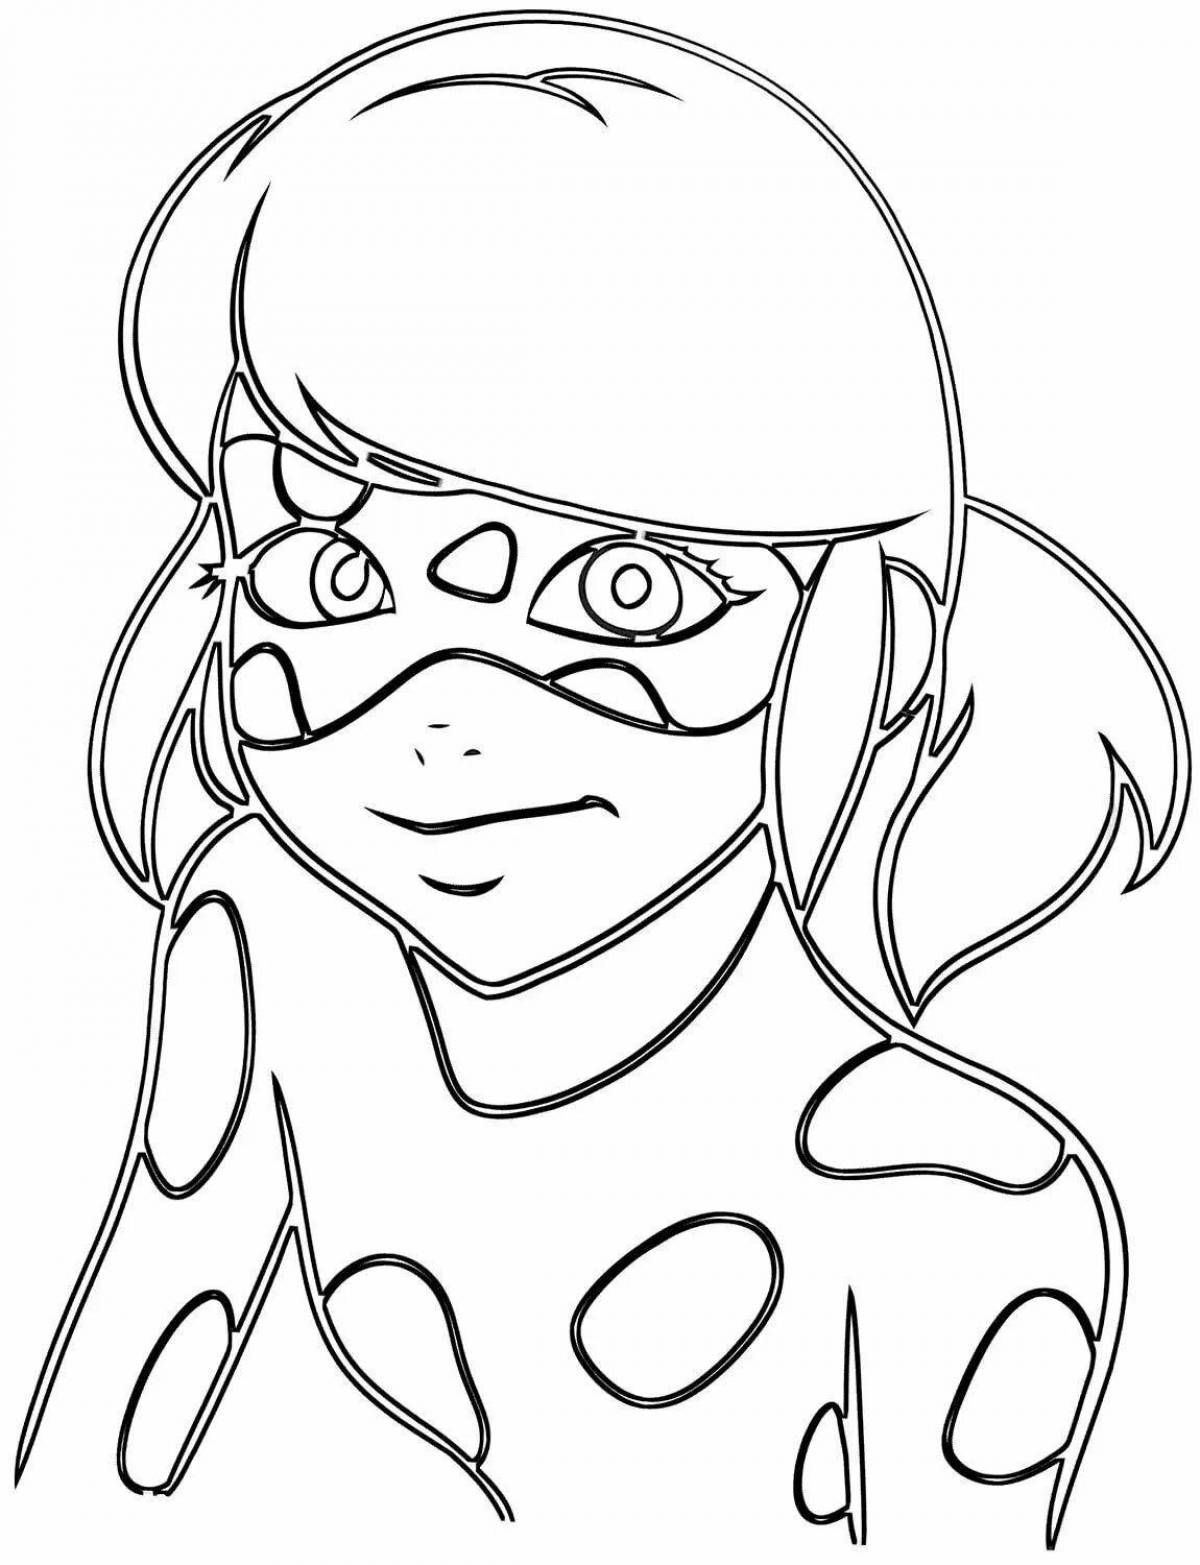 Coloring page funny veronica